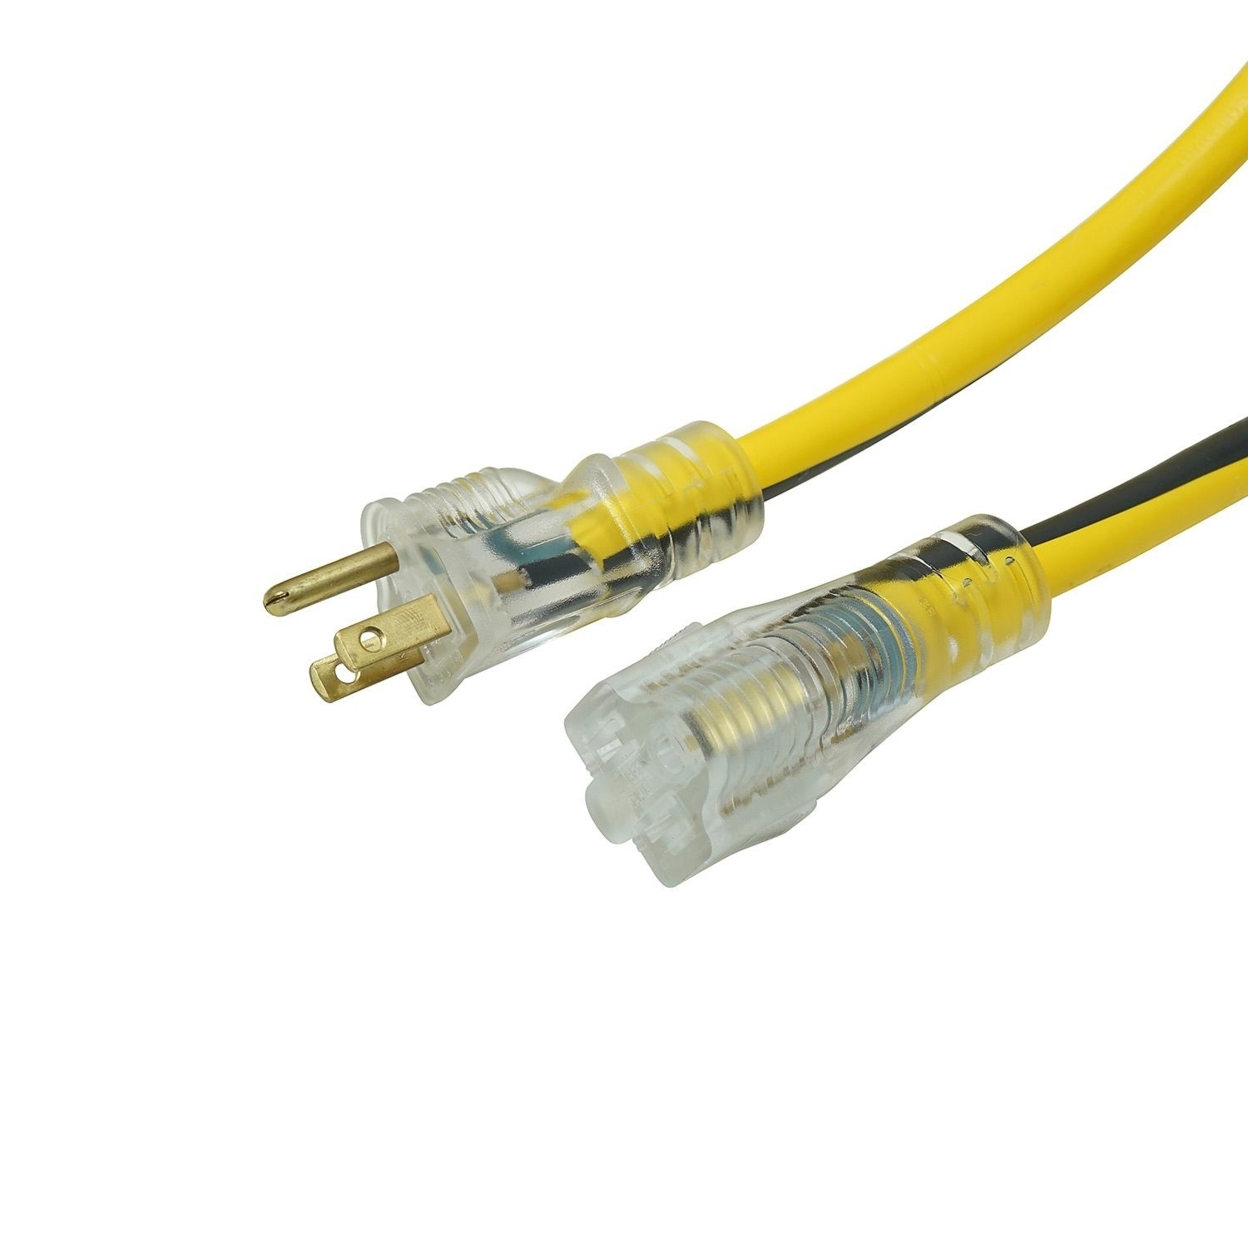 Yellow Jacket 100-ft. Outdoor Extension Cord W/ Lighted Ends